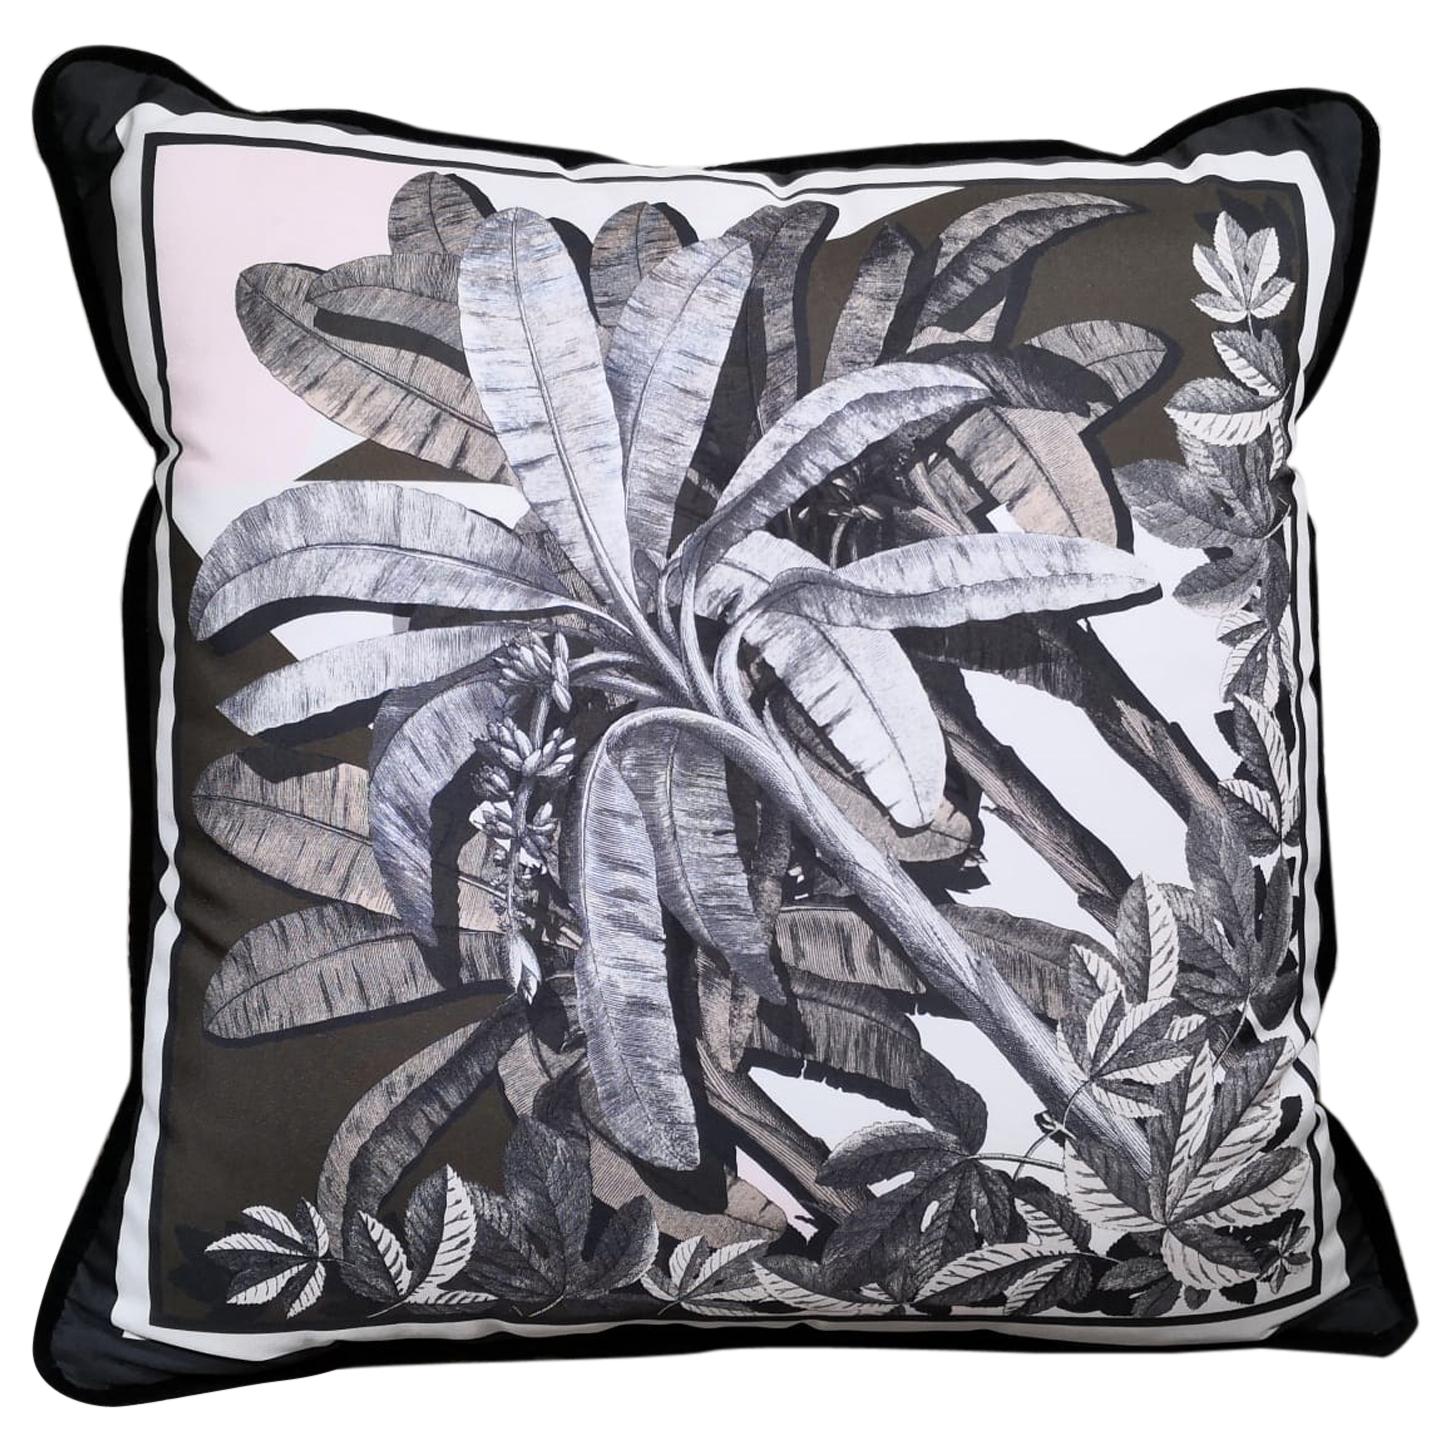 Italian Handmade Contemporary Style, "Black and Wild" Collection Pillow 1 of 4